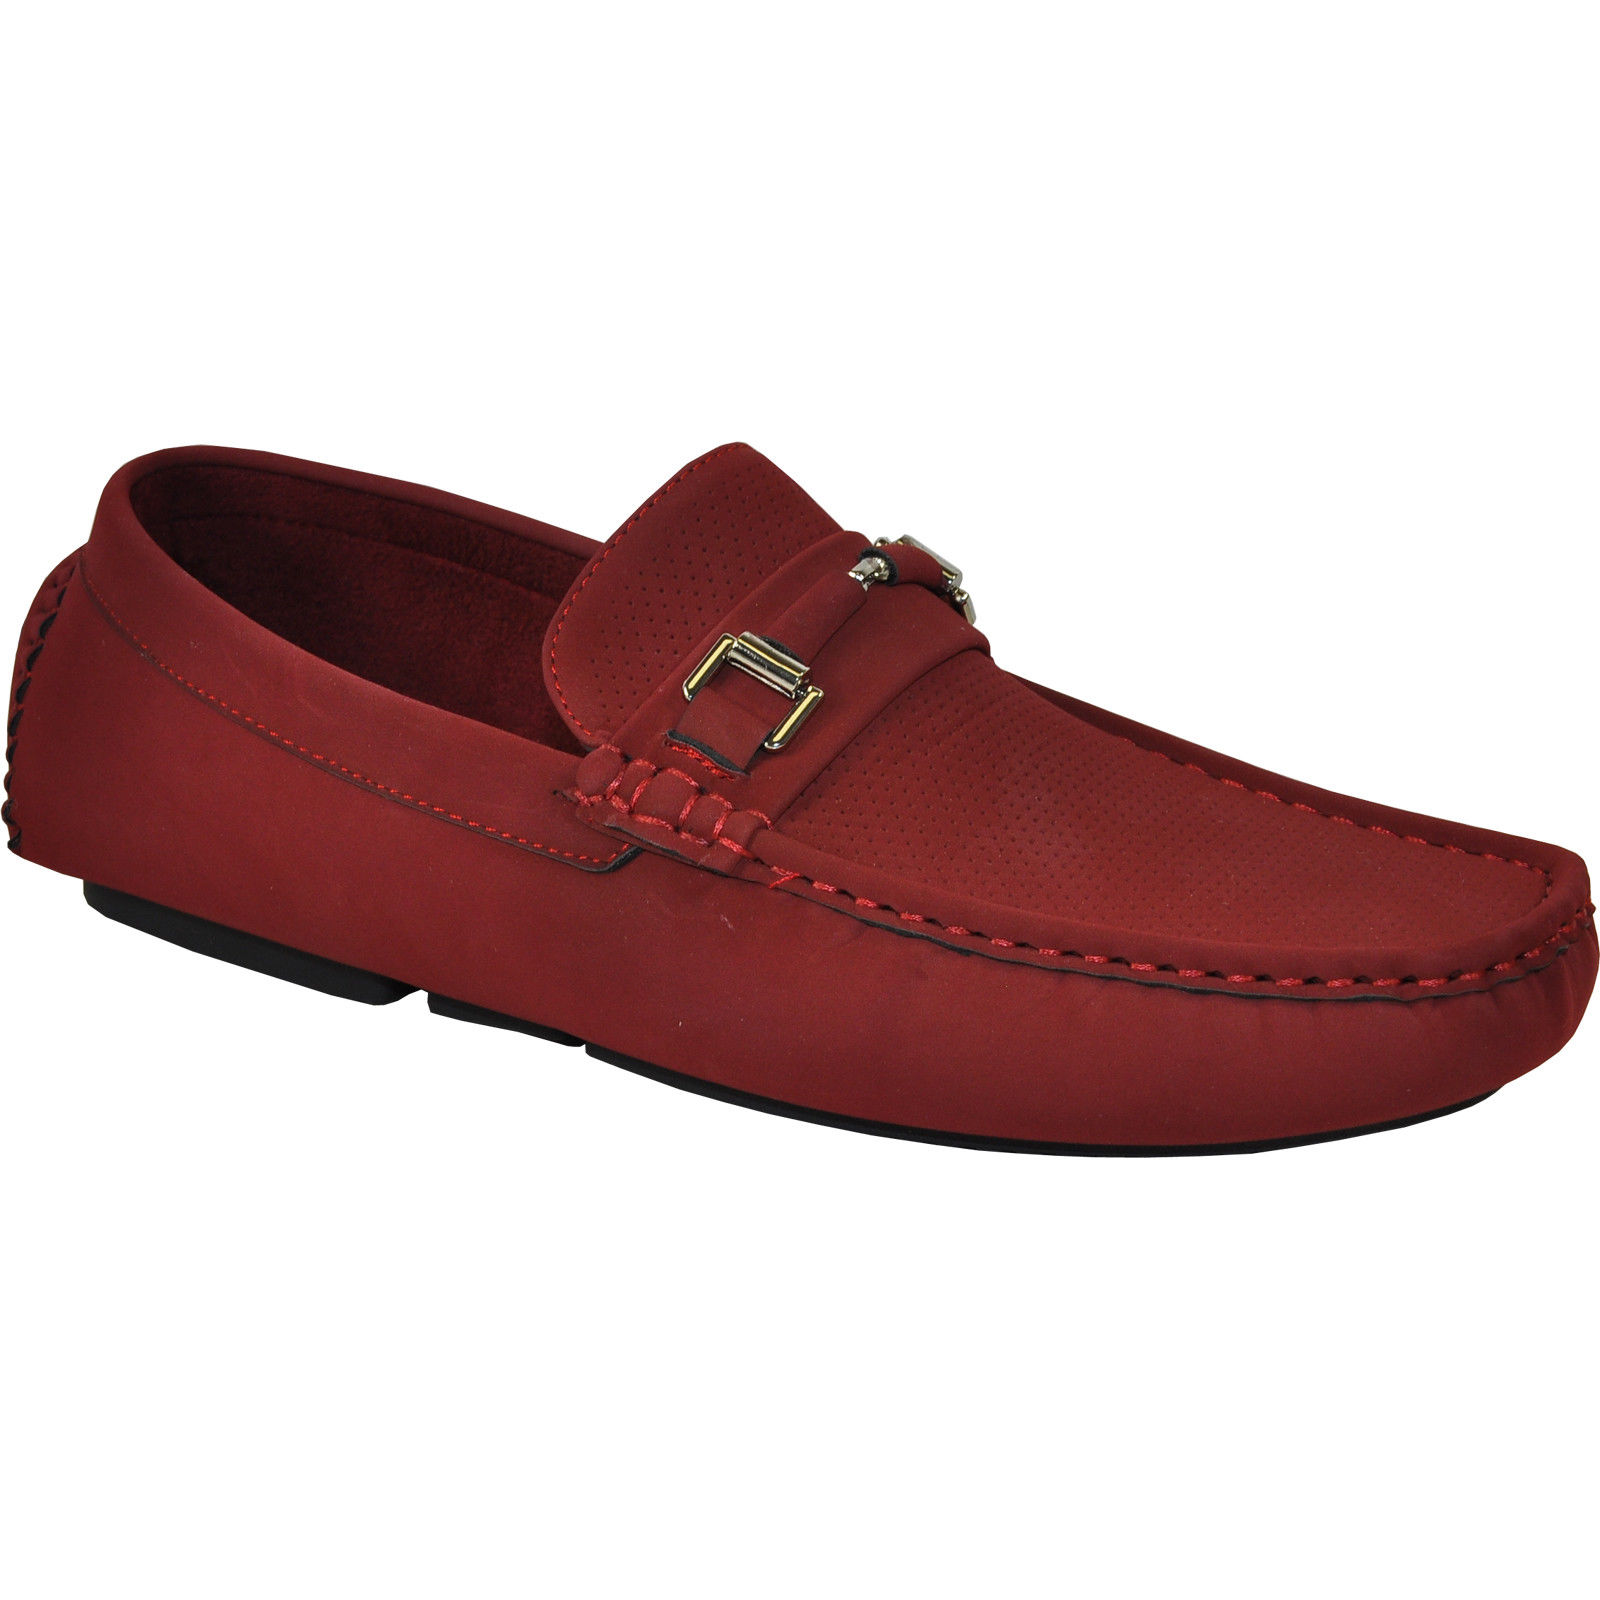 Bravo! Men Casual Shoe Todd-1 Driving Moccasin Red 10M US - image 1 of 7